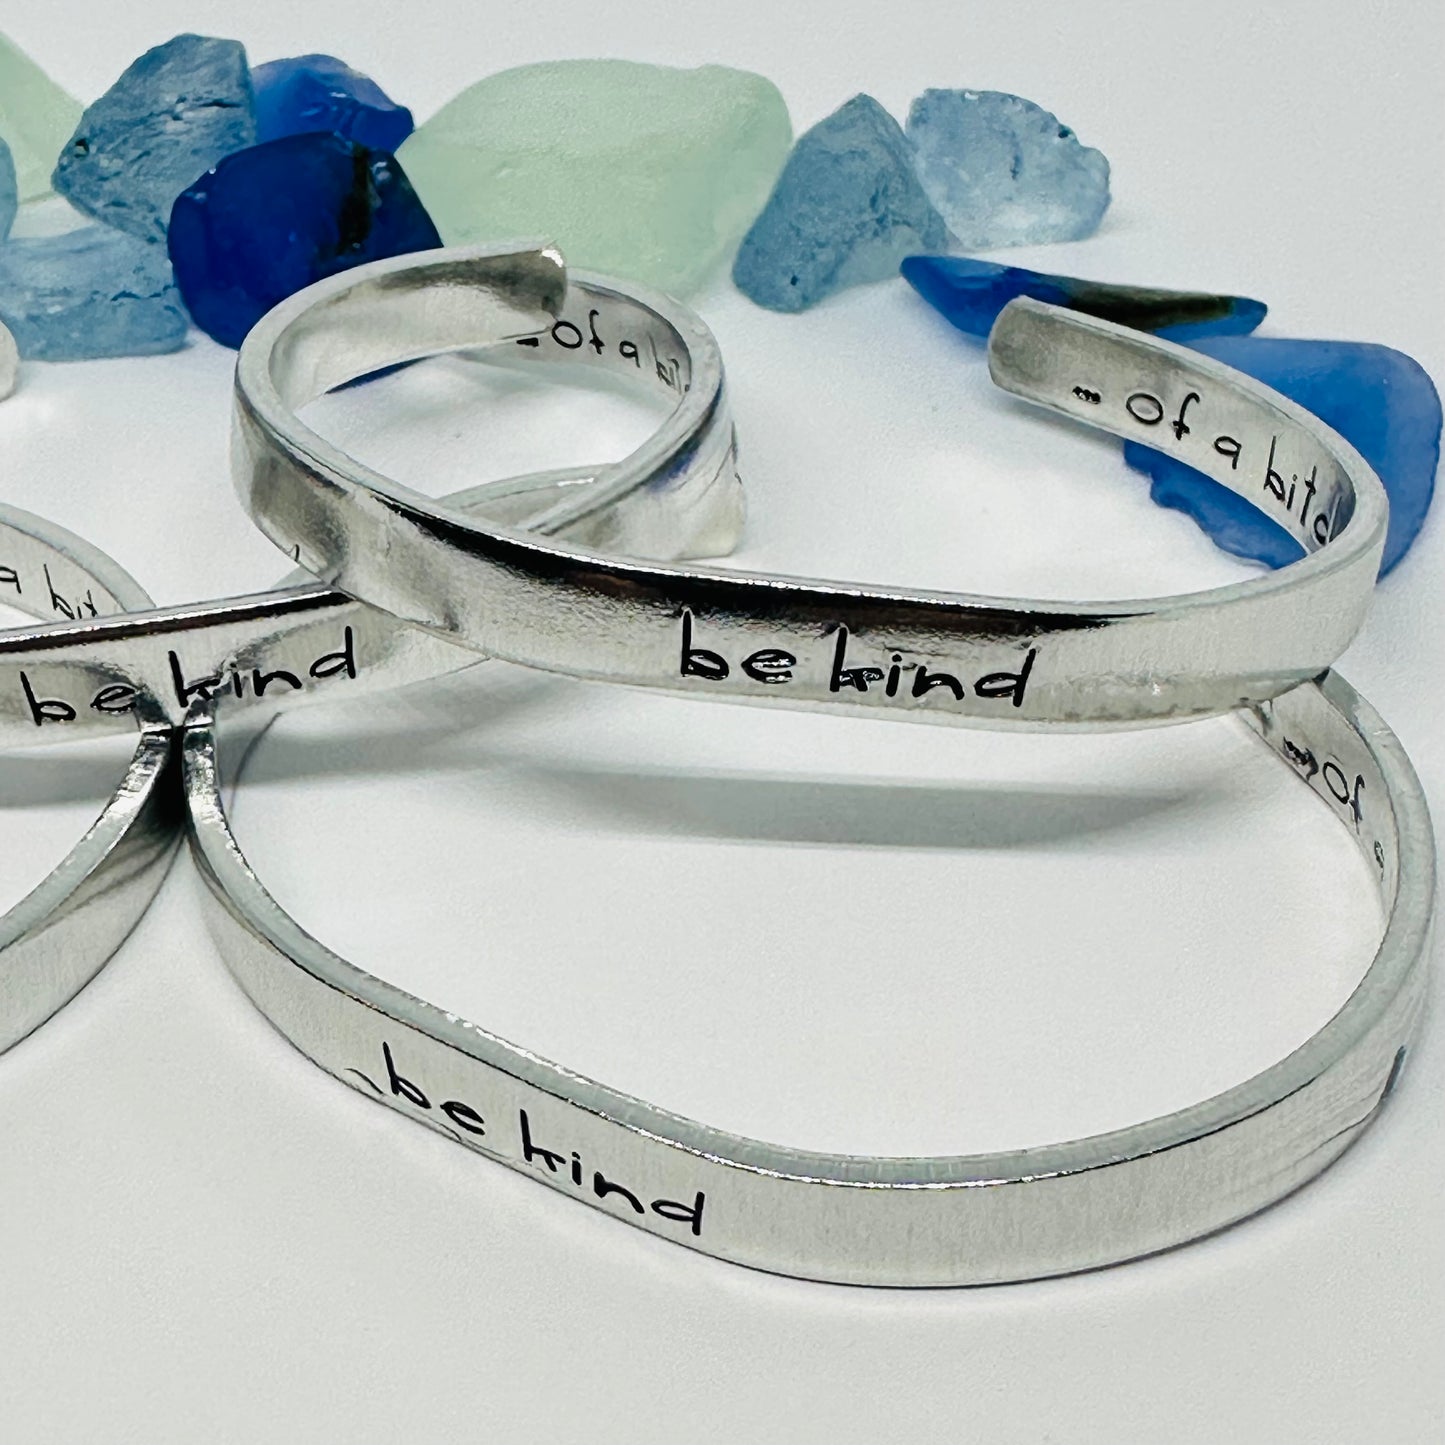 be kind ... of a bitch - Hand Stamped Double-Sided 1/4" Aluminum Cuff